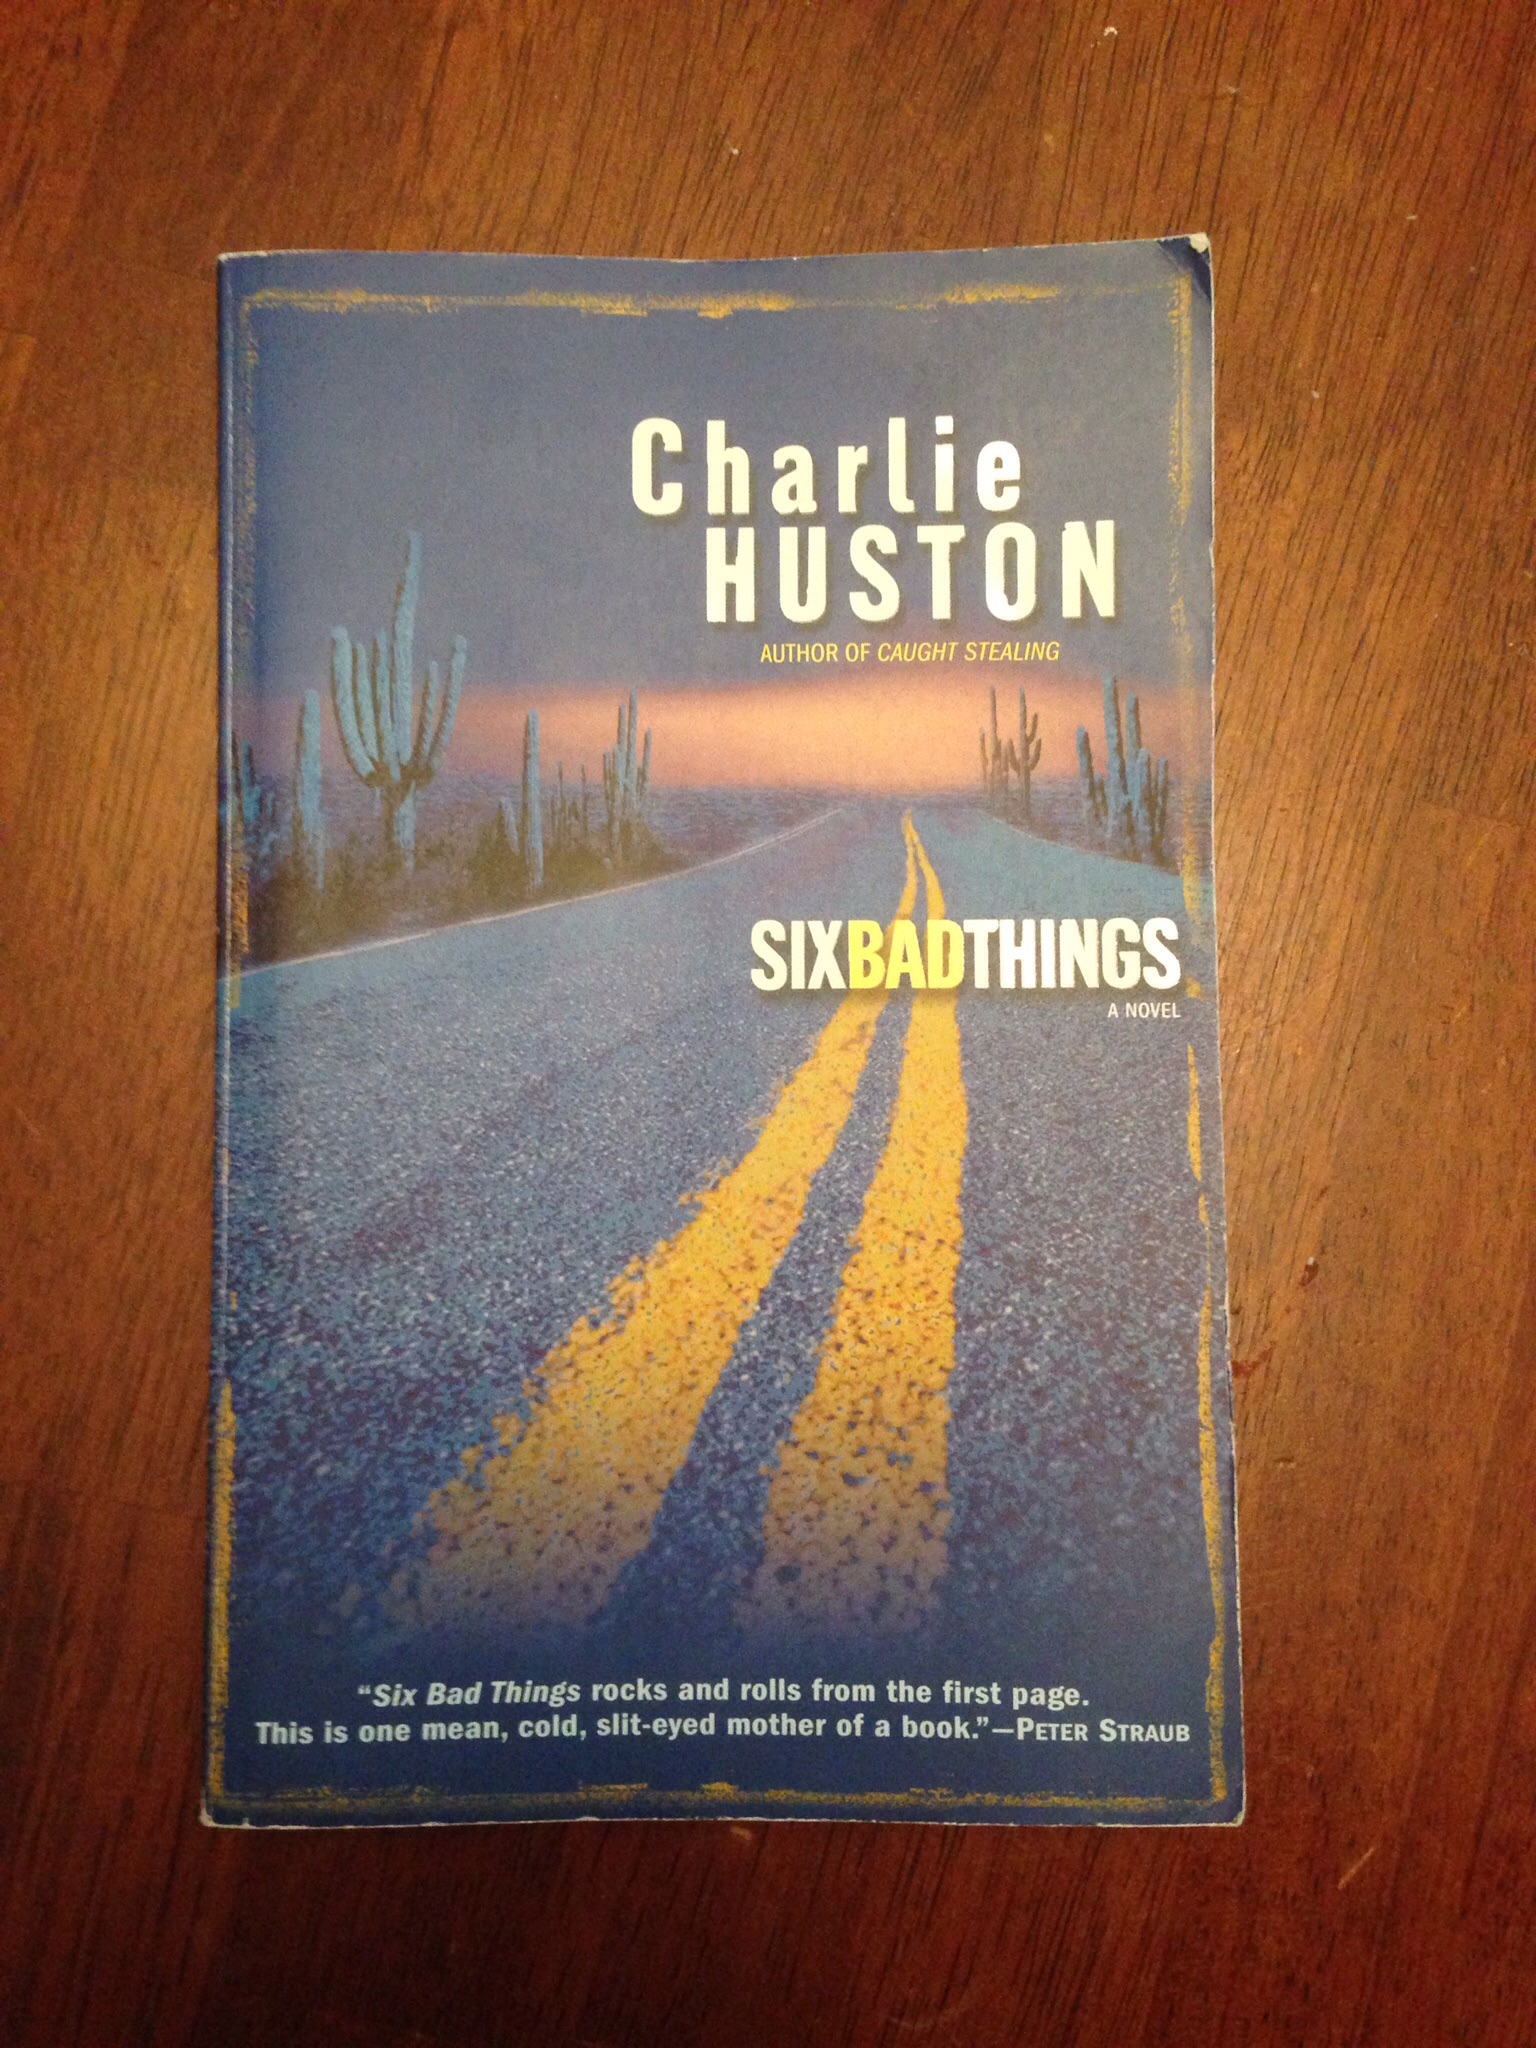 Book Six Bad Things by Charlie Huston